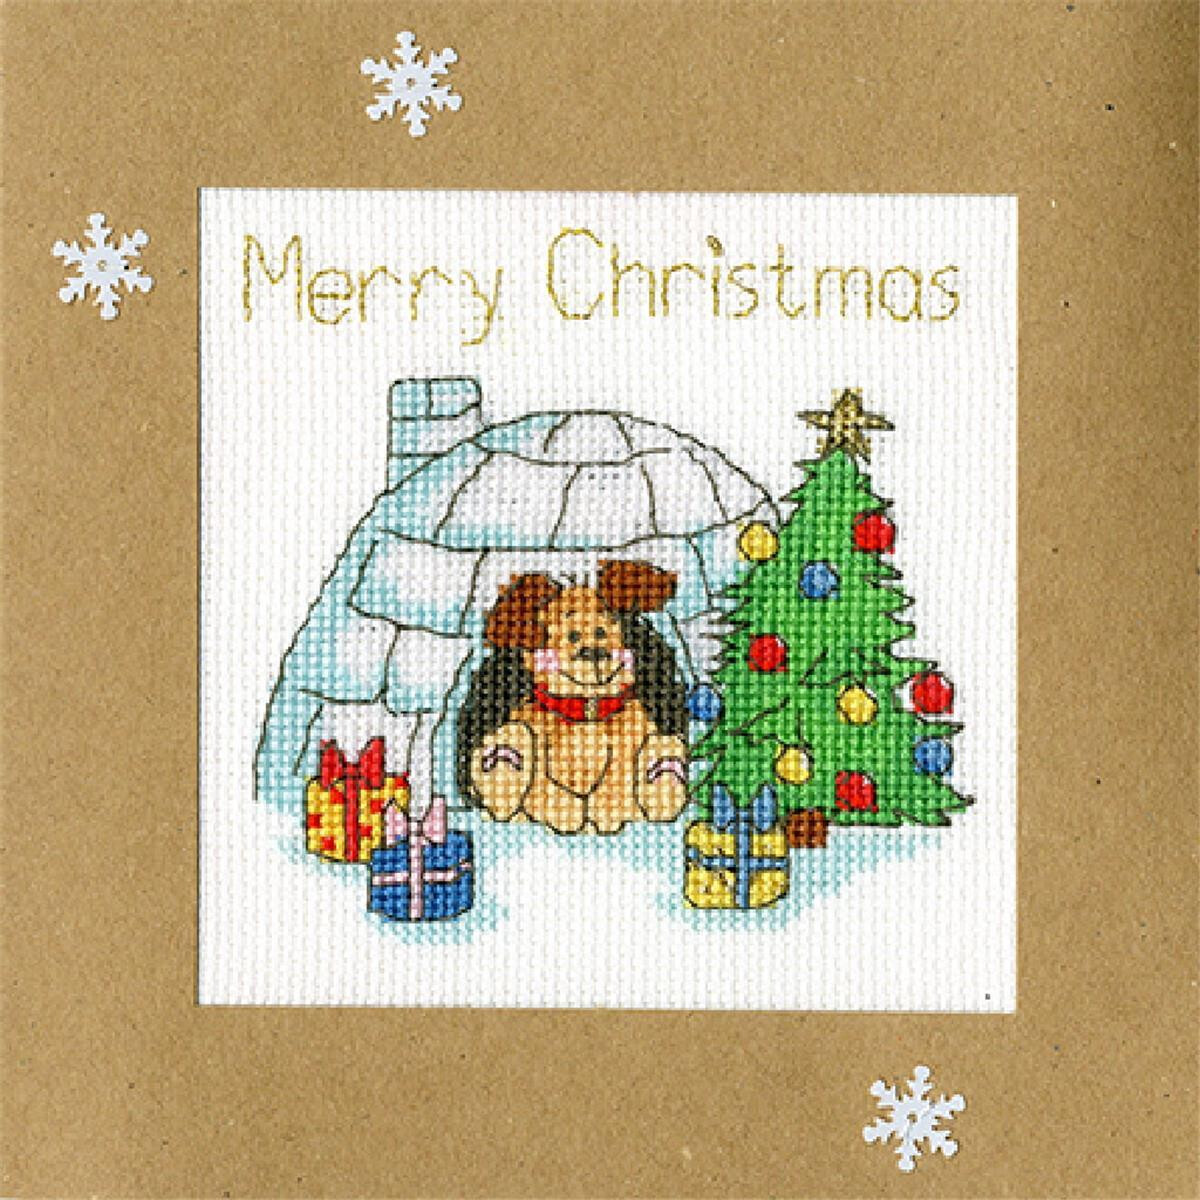 A festive embroidery pack from Bothy Threads shows a dog...